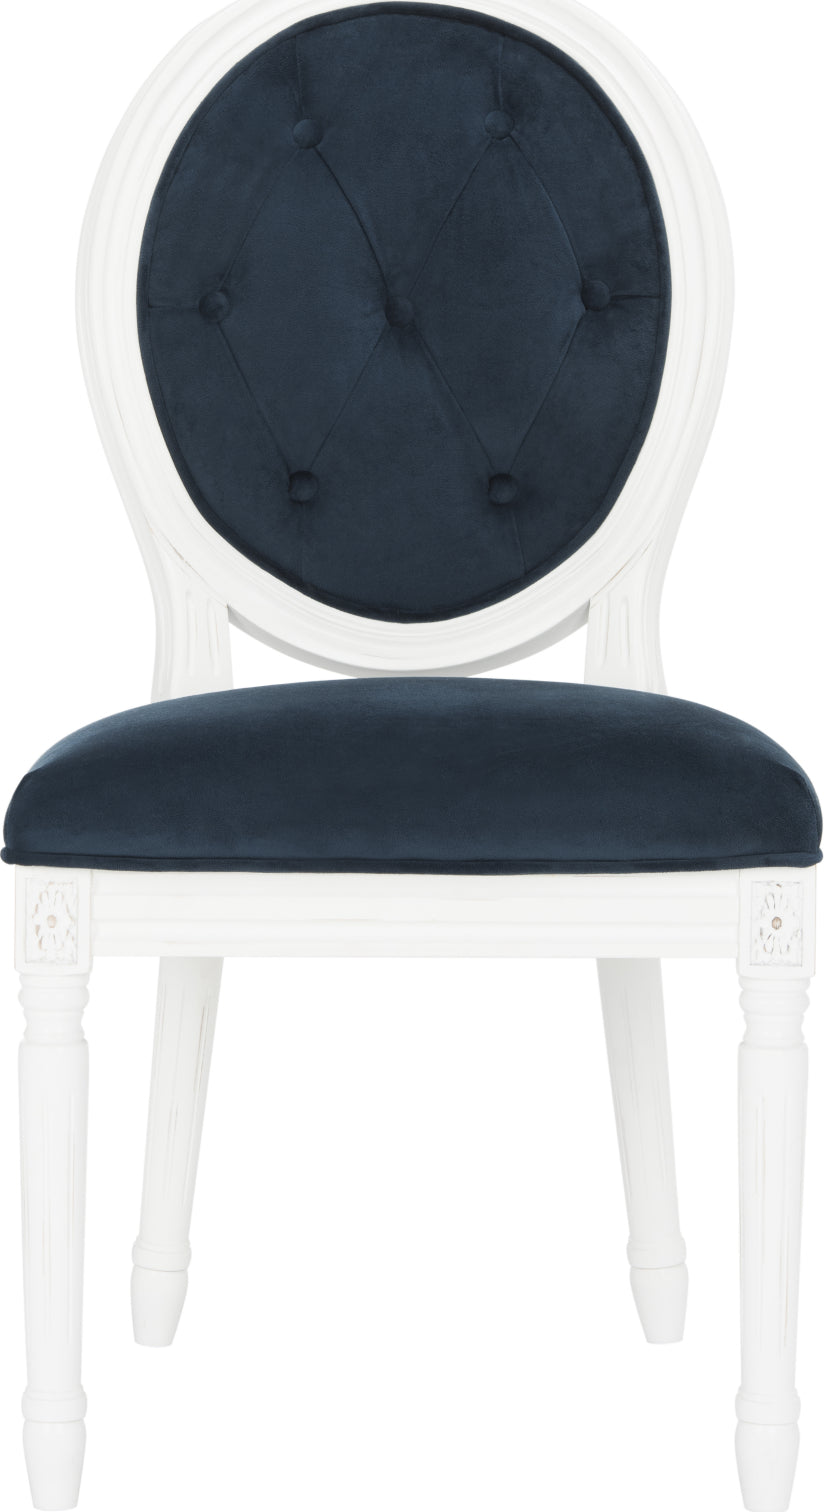 Safavieh Holloway Tufted Oval Side Chair Navy and White Furniture main image